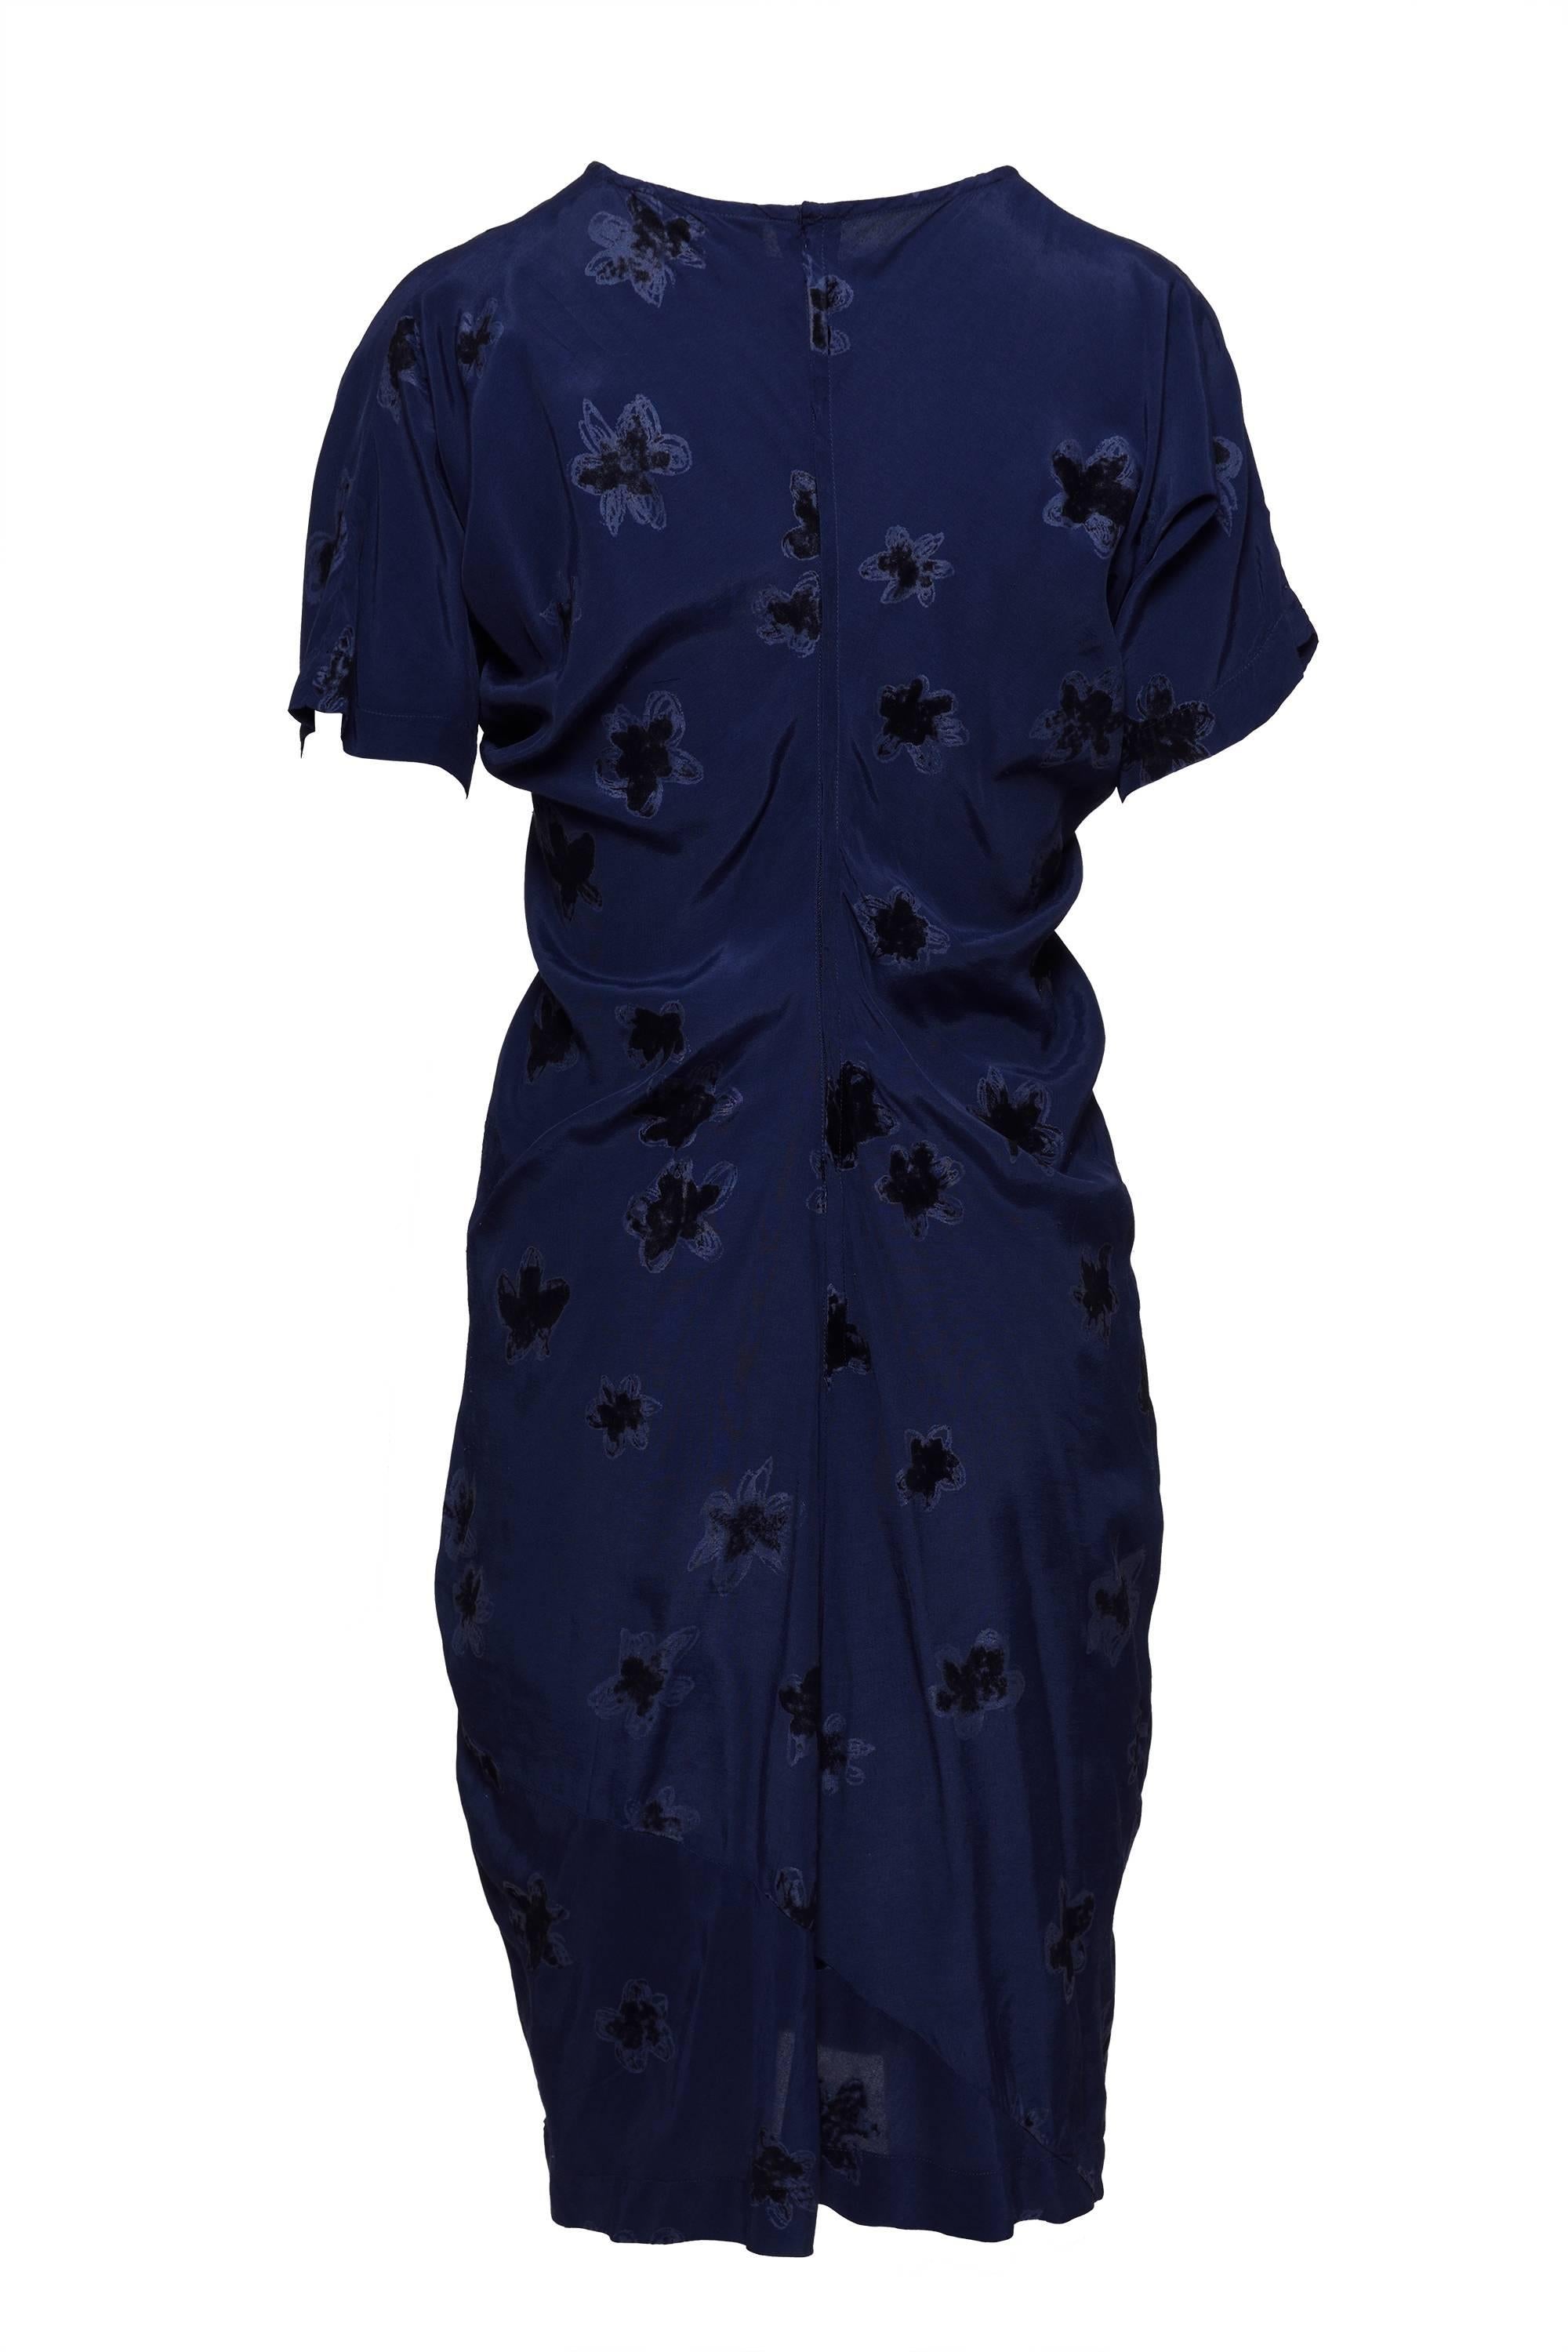 Comme De Garcons Blu Rayon Dress with flowers velvet flocked fabric. 
Back zip and hook end eye closure.

Excellent Condition 

Label: COMME DE GARCONS 
Fabric: Rayon 
Colour: Blu

Measurements 
Label Size L
Shoulders 16 in
Sleeves 9 in 
Bust 46